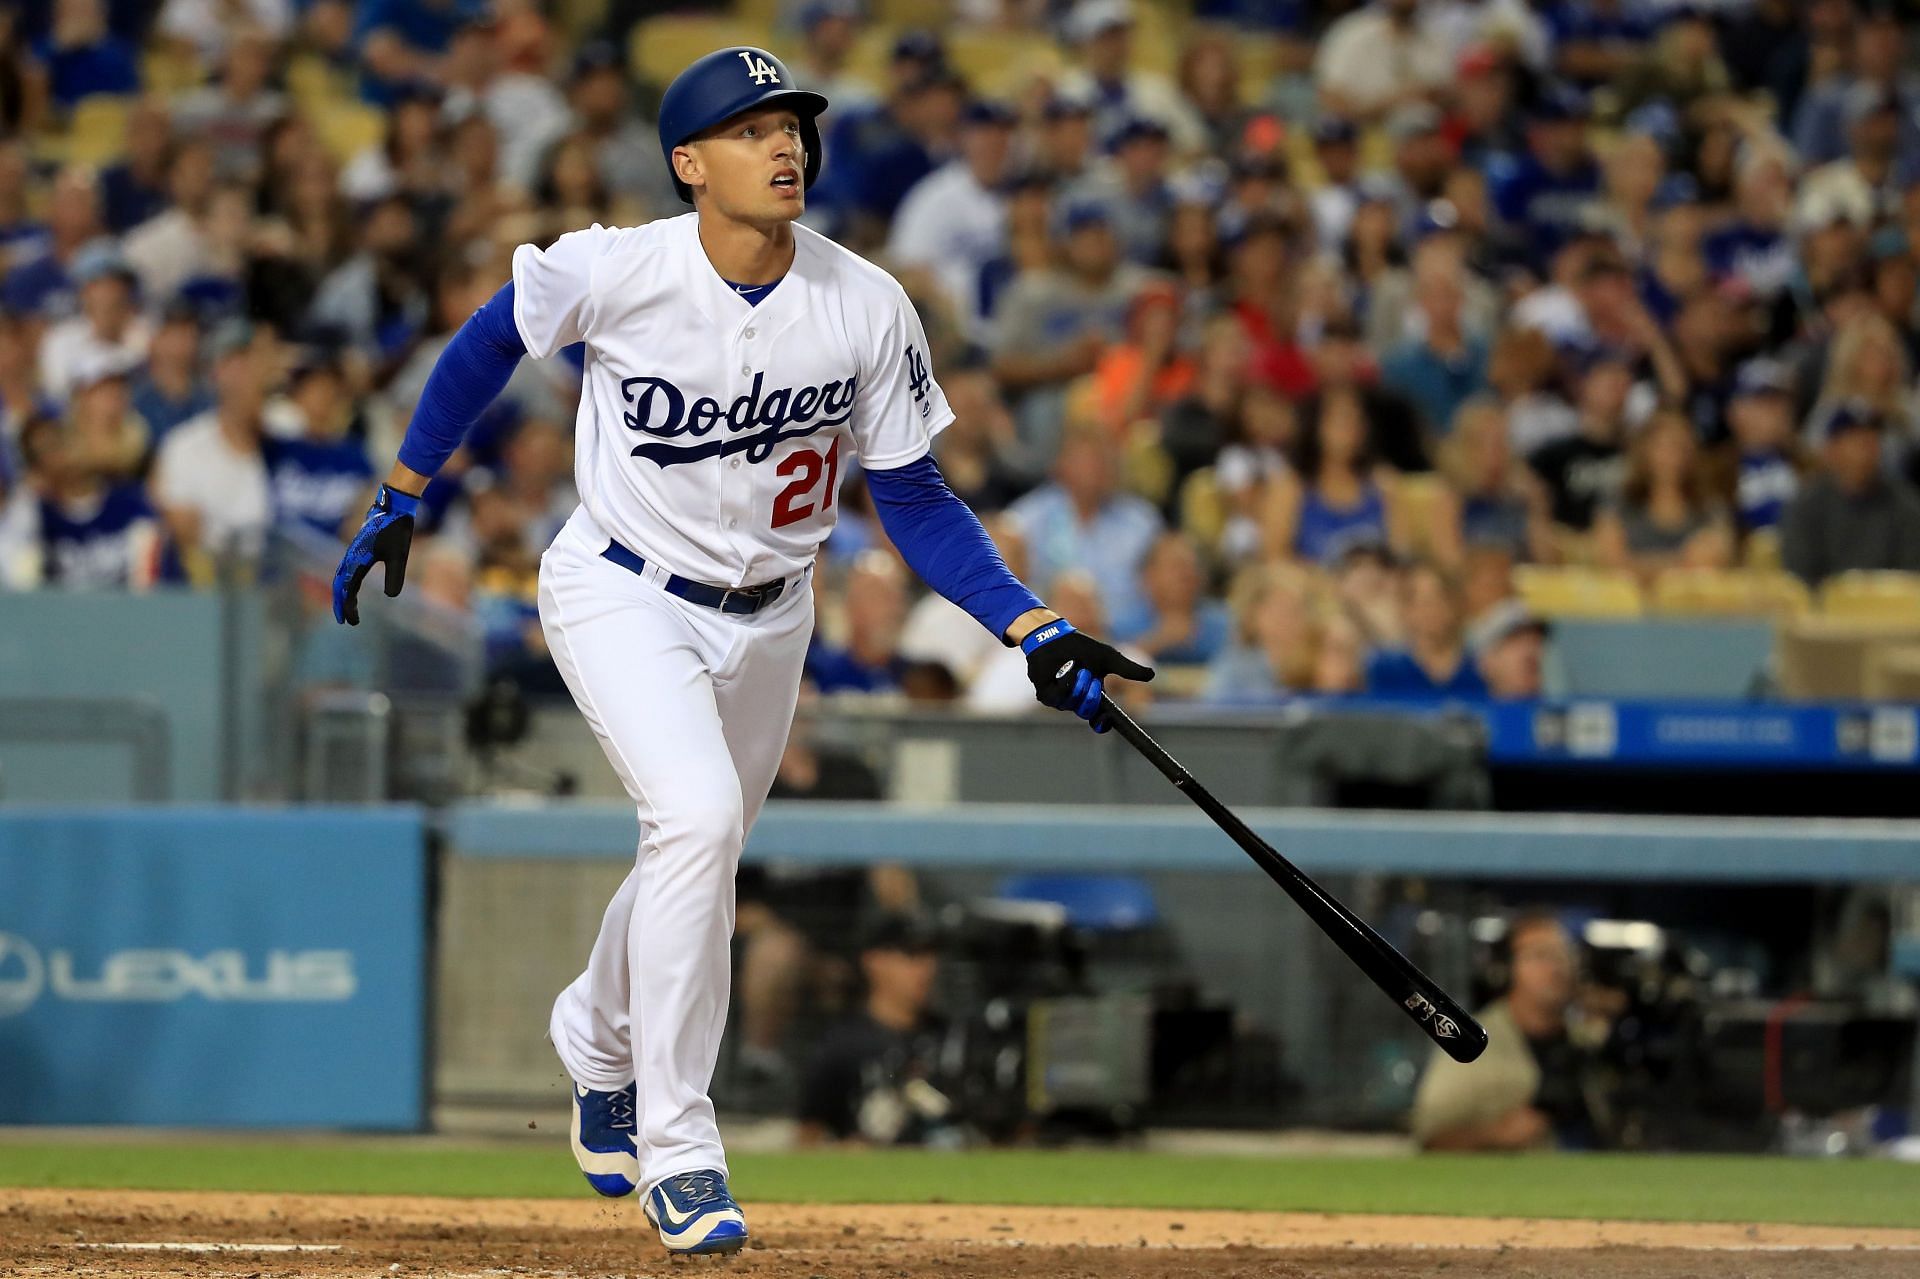 How Trayce Thompson Went From “Klay's Younger Brother” to Dodgers Linchpin